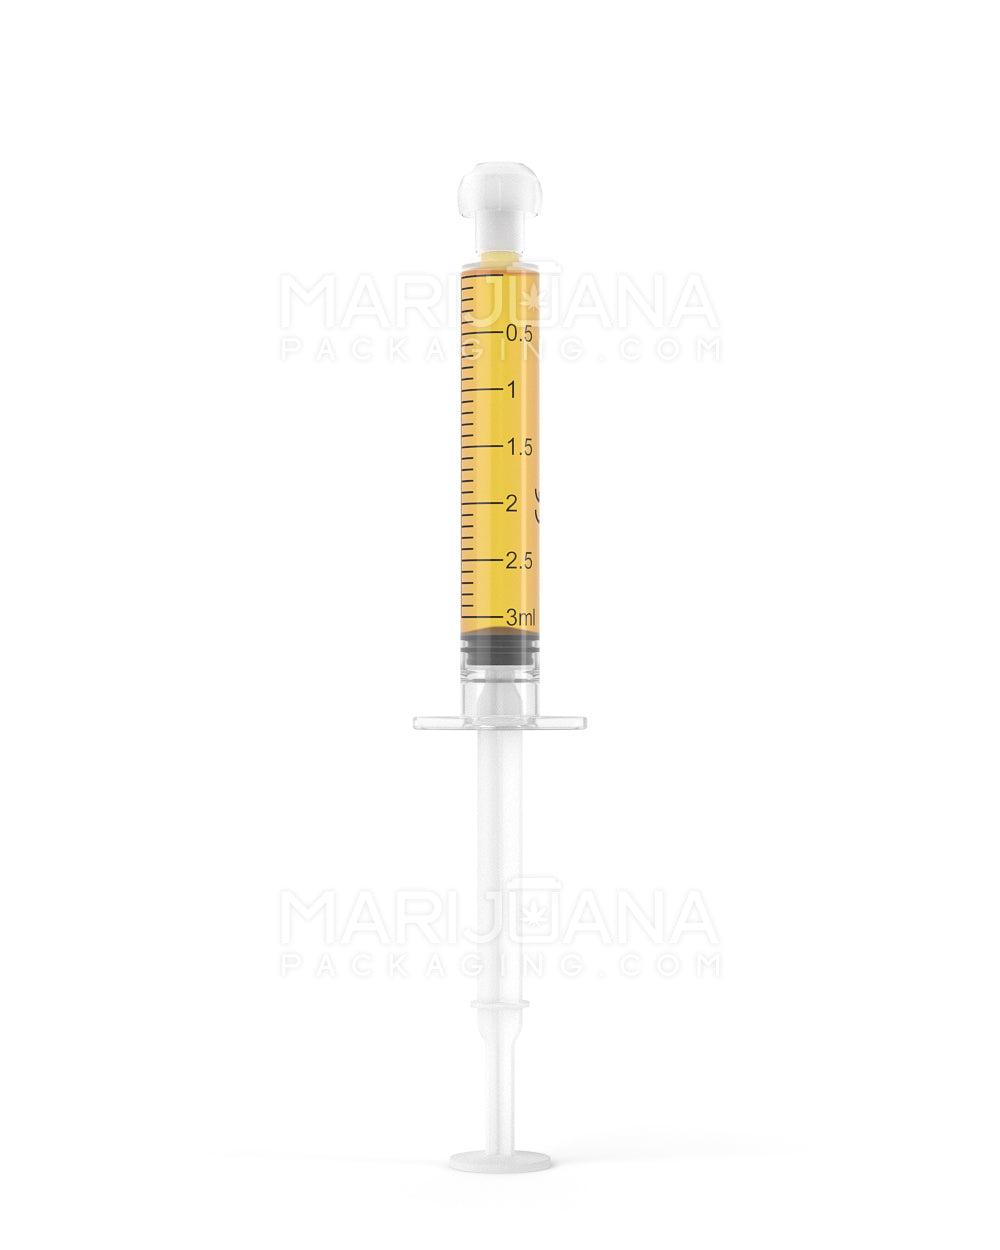 Plastic Oral Concentrate Syringes | 3mL - 0.5mL Increments | Sample - 2